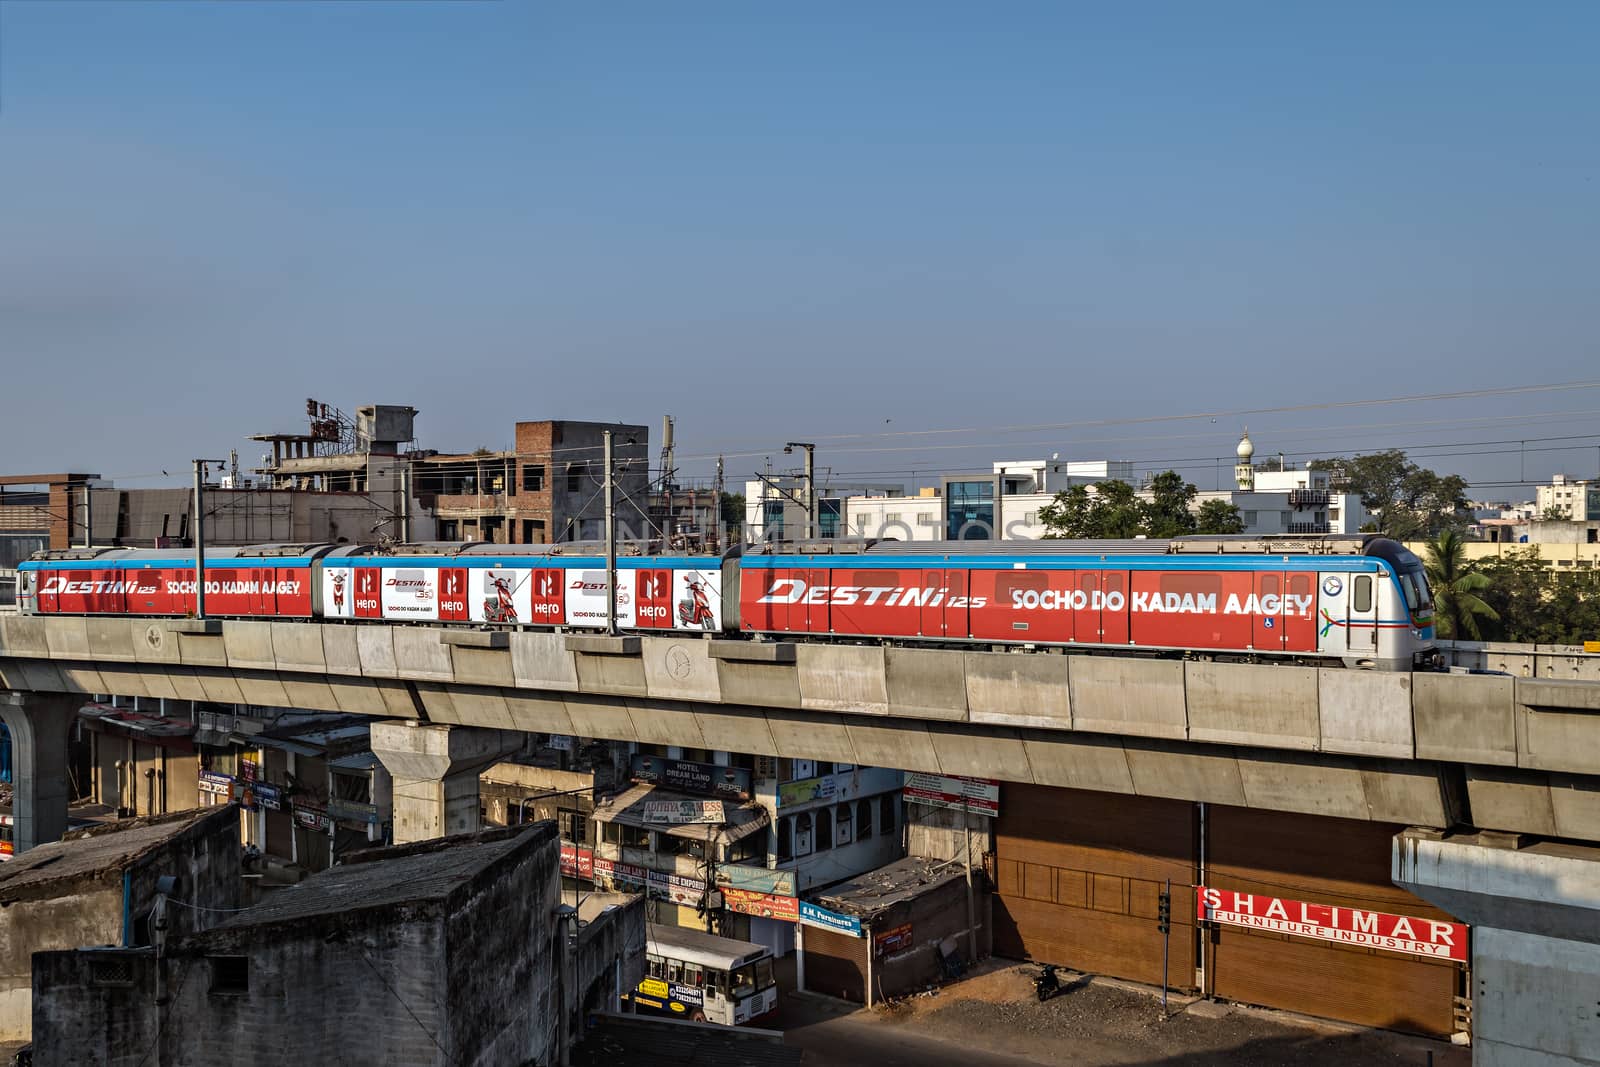 Rapid transit Hyderabad metro train enter Nampally station in the morning. The service has successfully completed one year in 2019